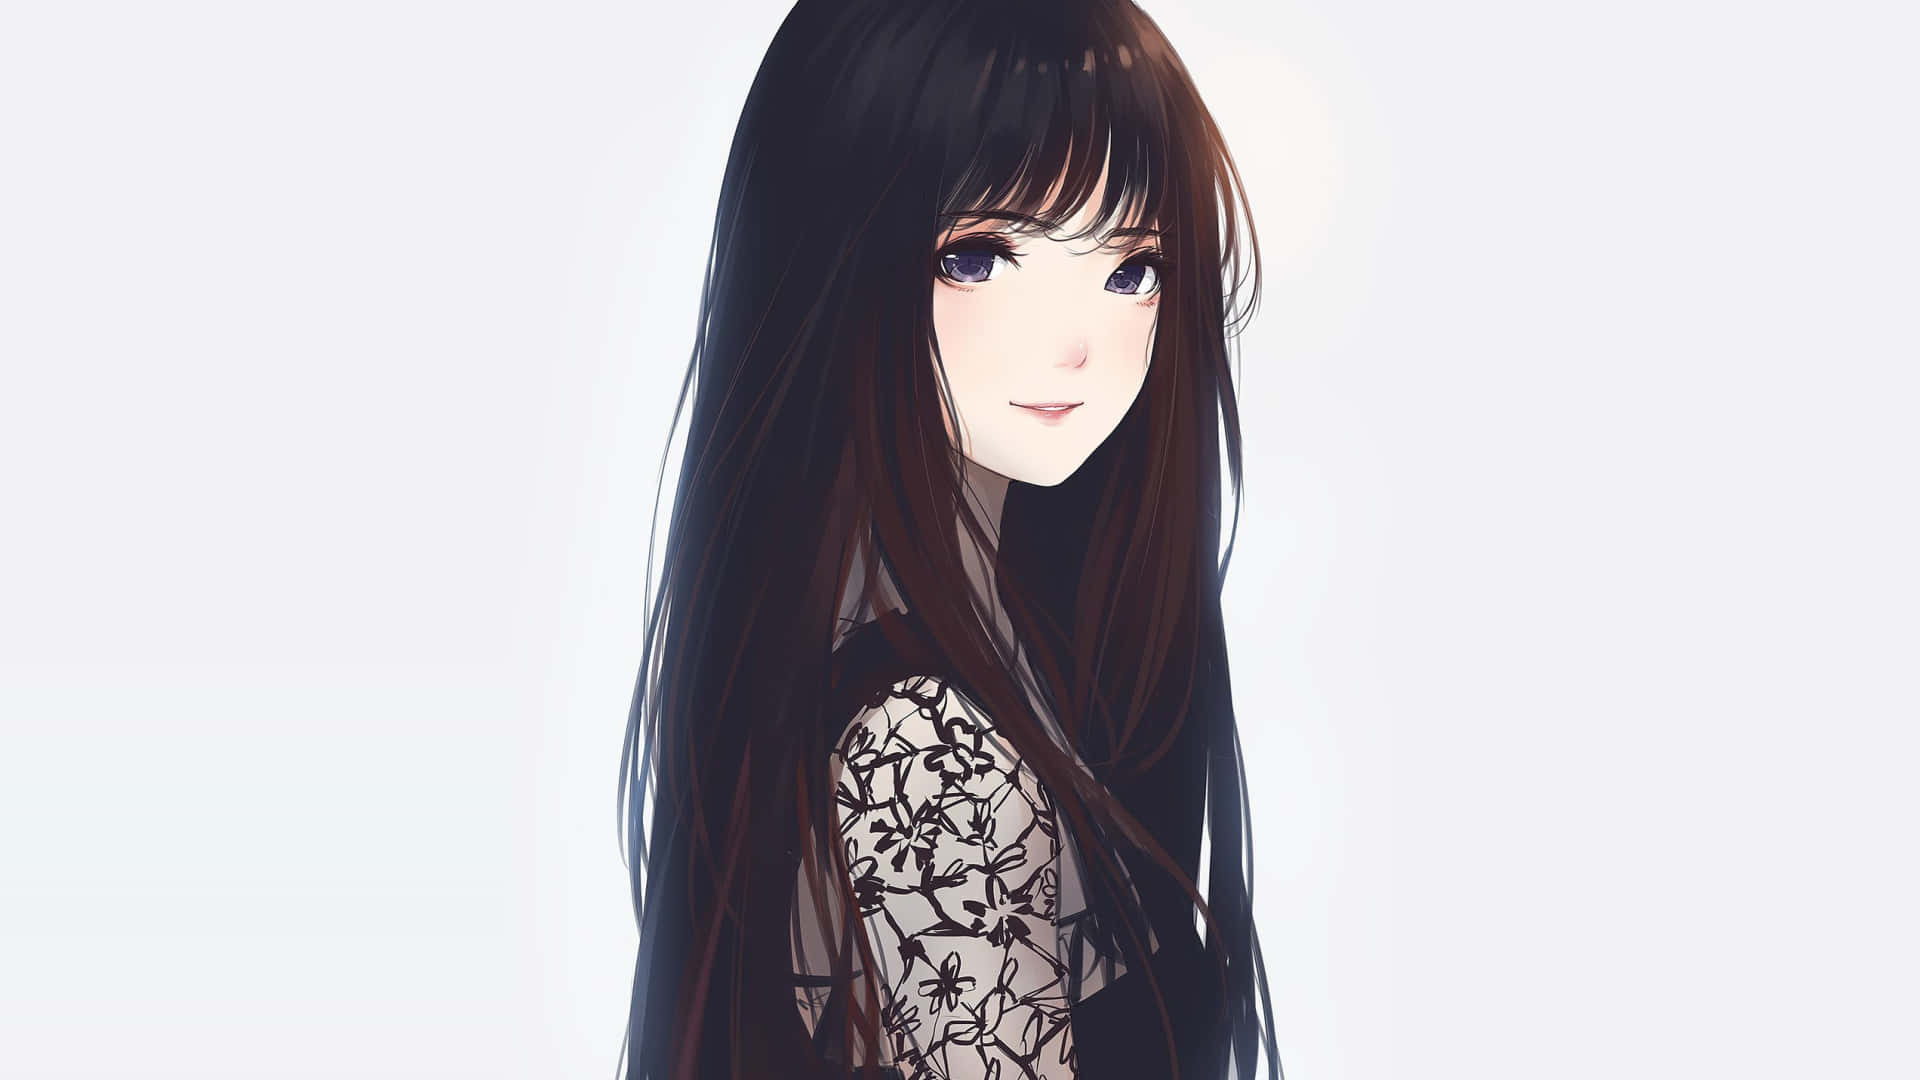 Line beauty anime girl with hairstyle and blouse Vector Image